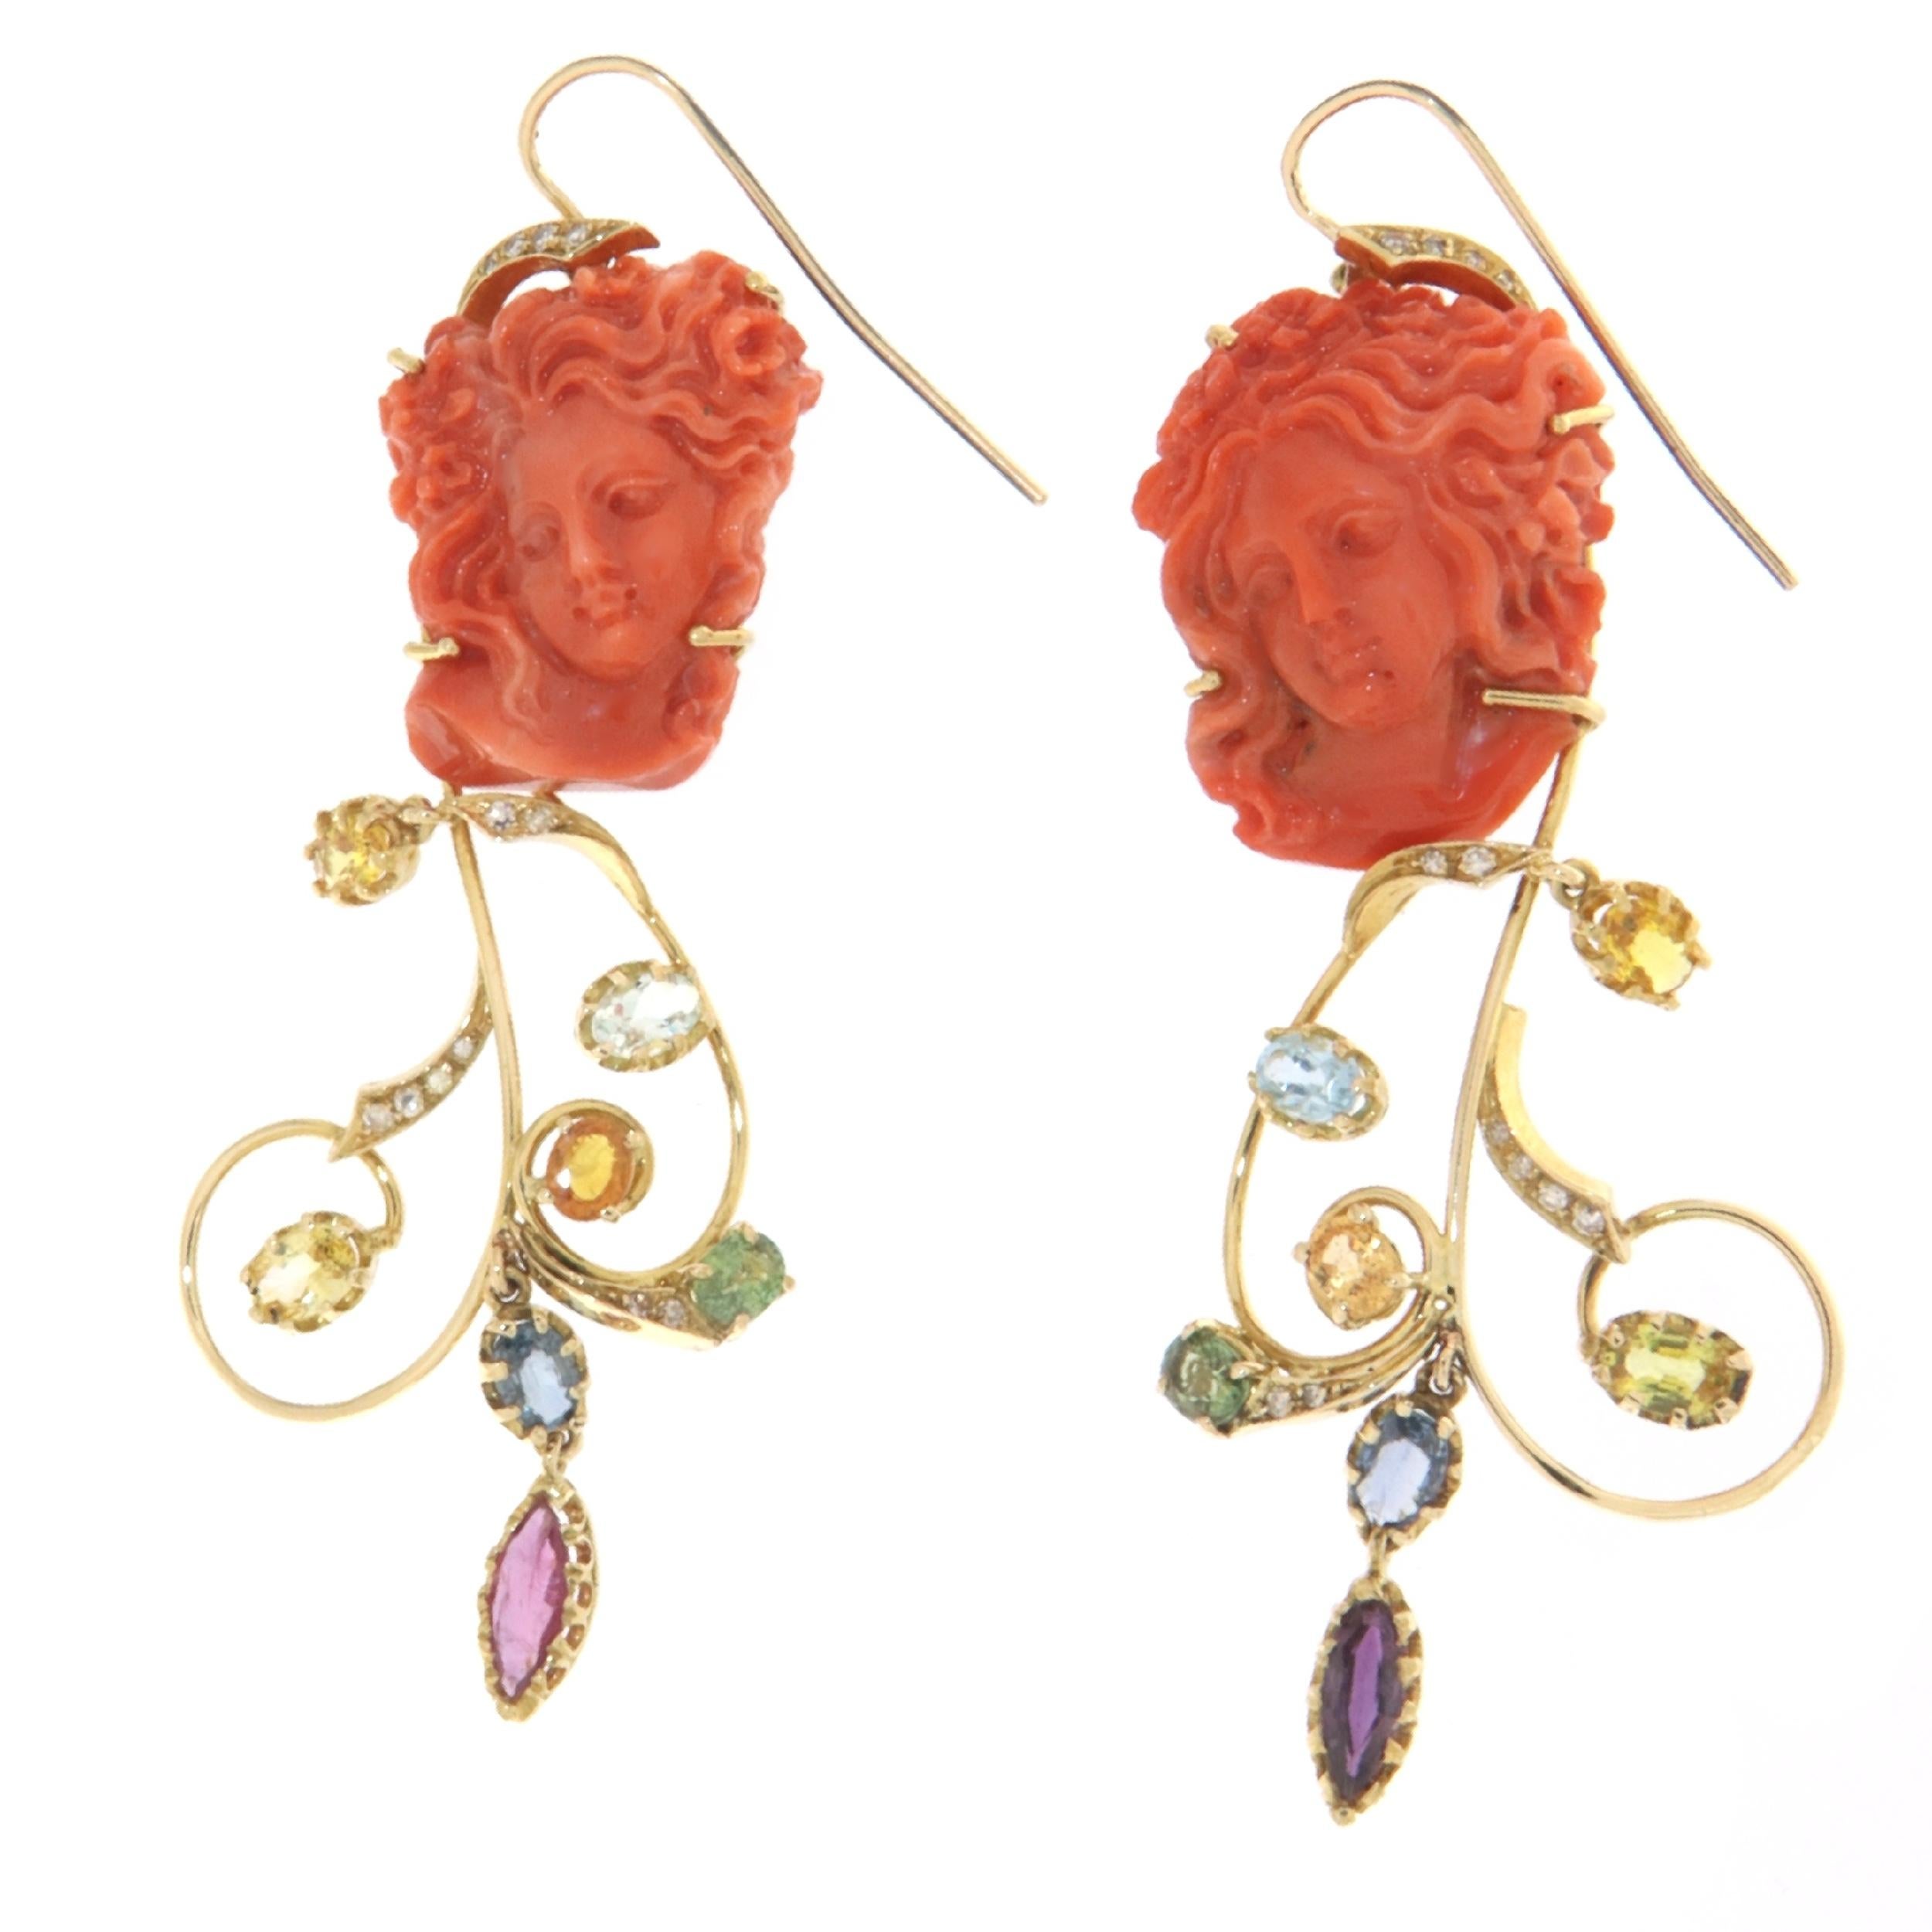 Spectacular Drop Earring made of 14K yellow gold, with an engraved coral woman face of a woman supporting a structure made up of gold ornaments and colored stones.

The textures of the colors and the surrounding flourishes outline the beauty of the